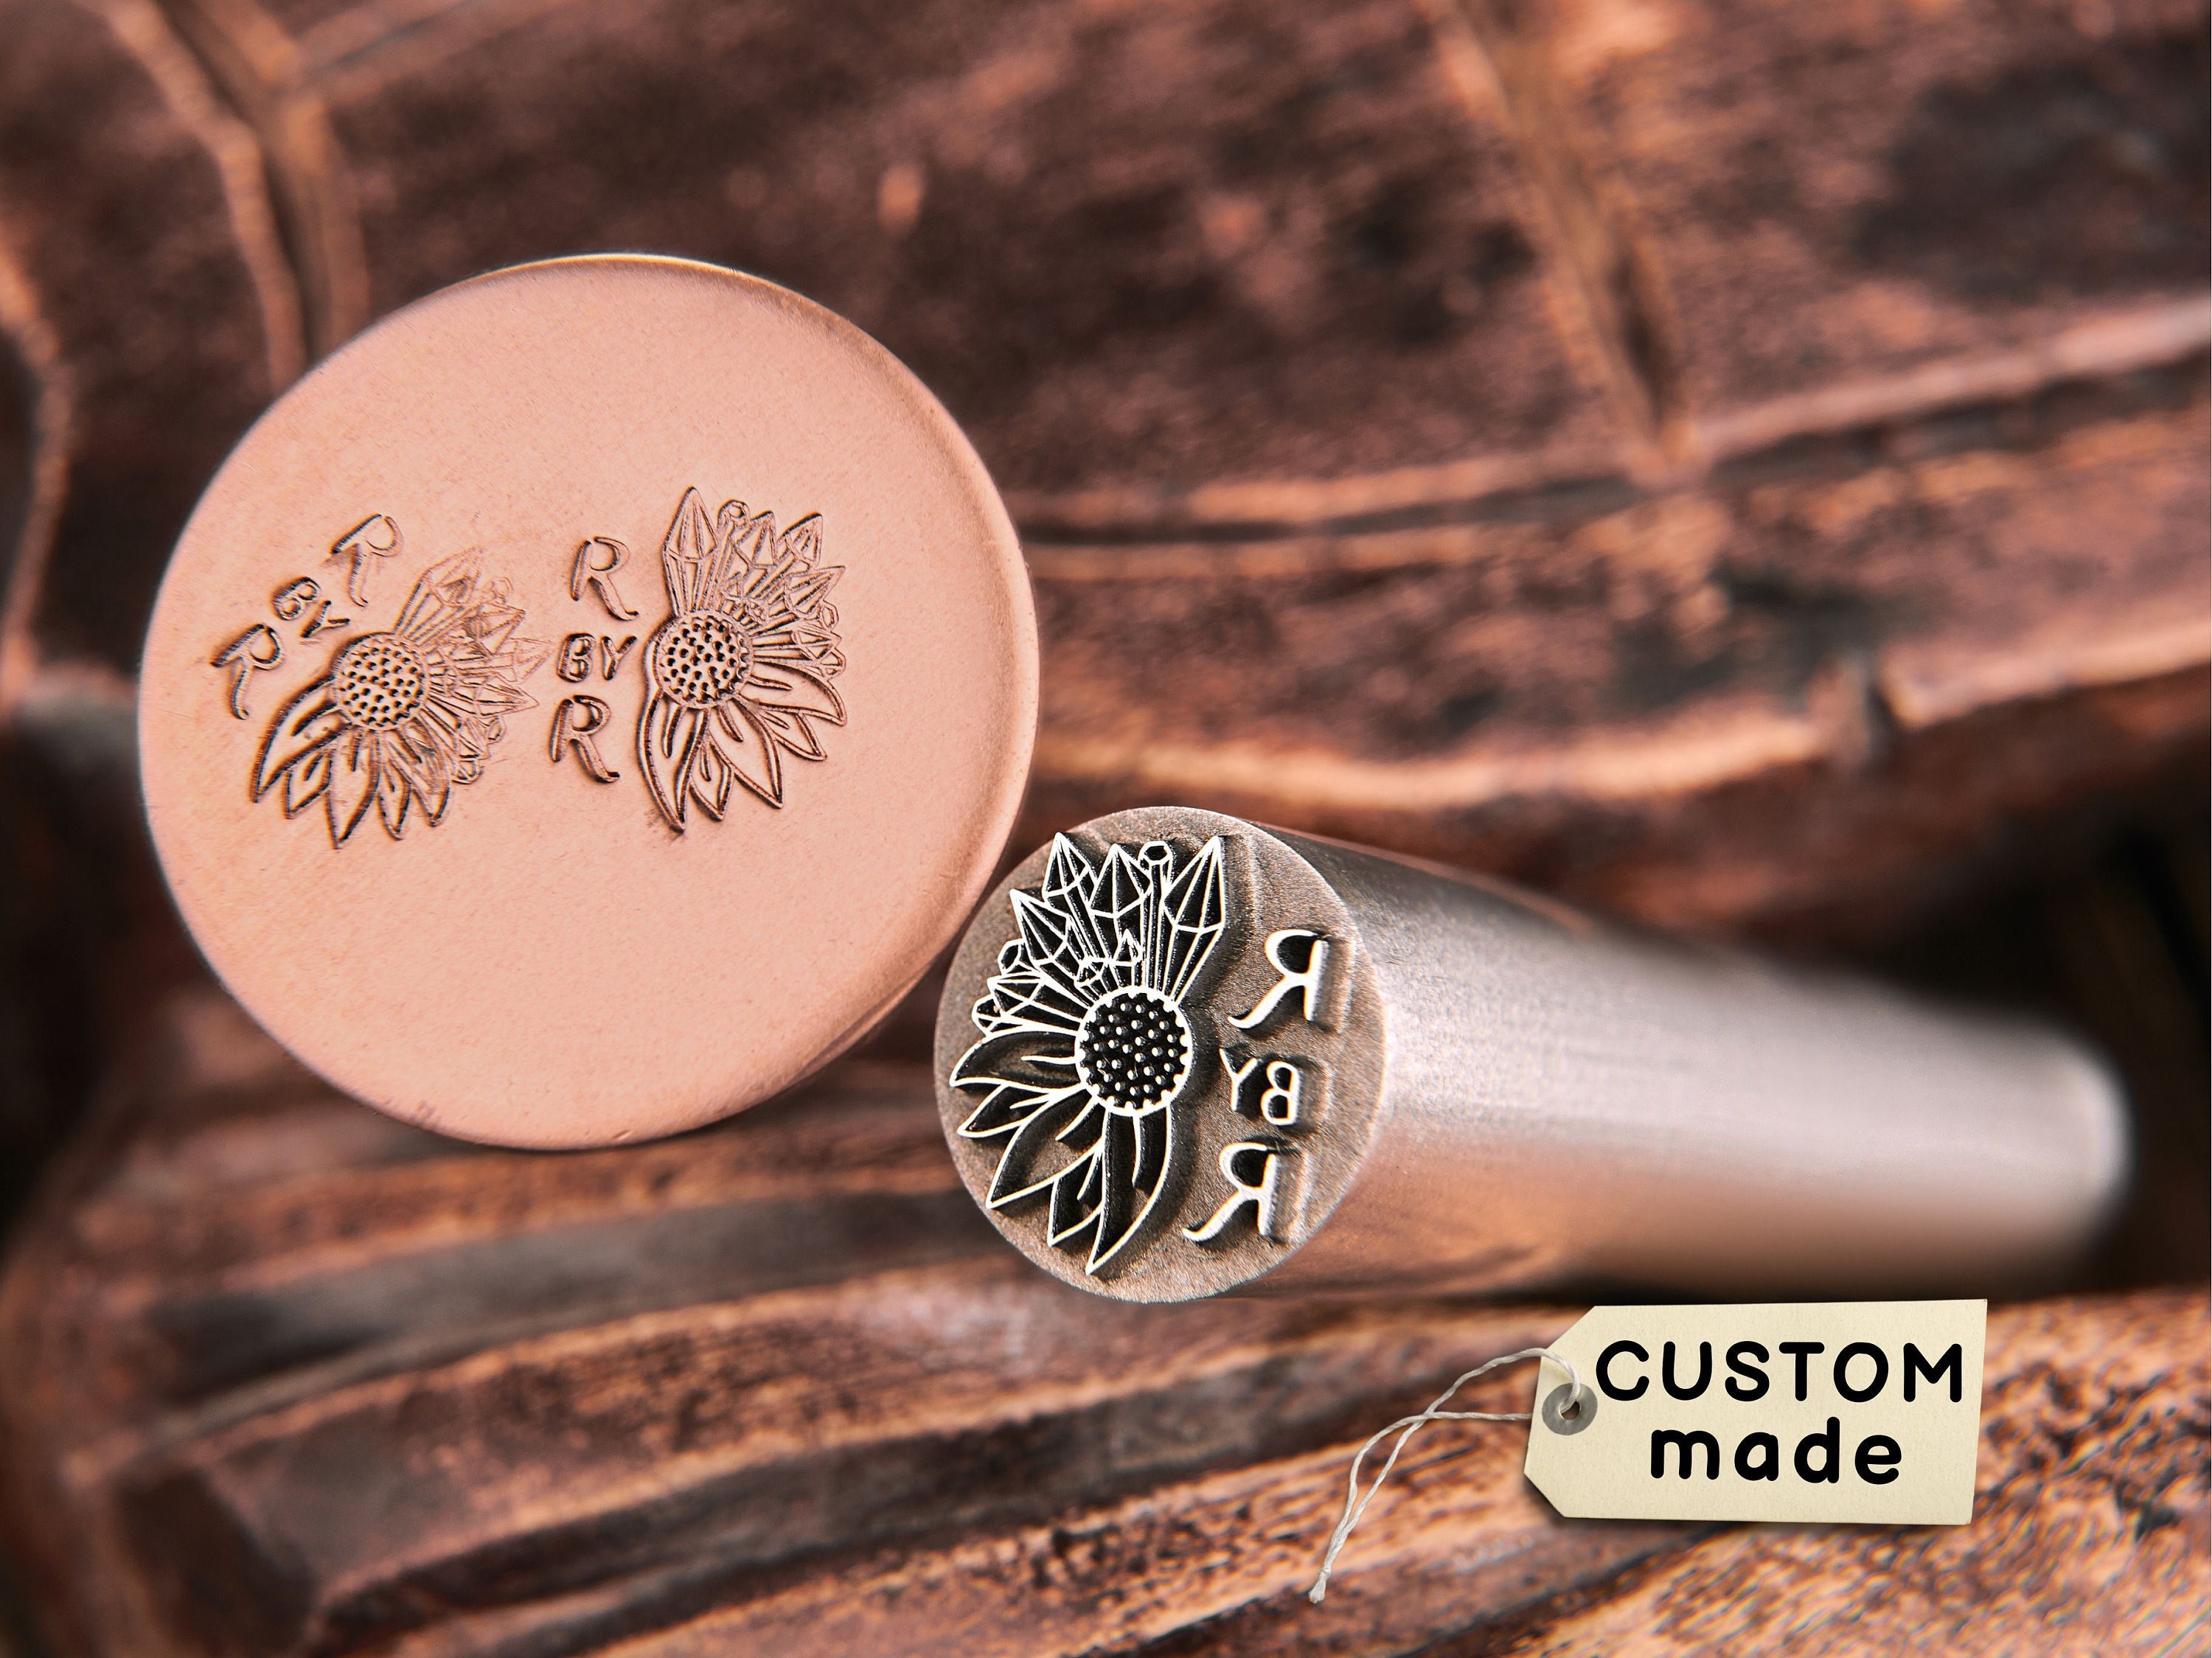 Custom Metal Stamps and Steel Punches With Your Business Logo